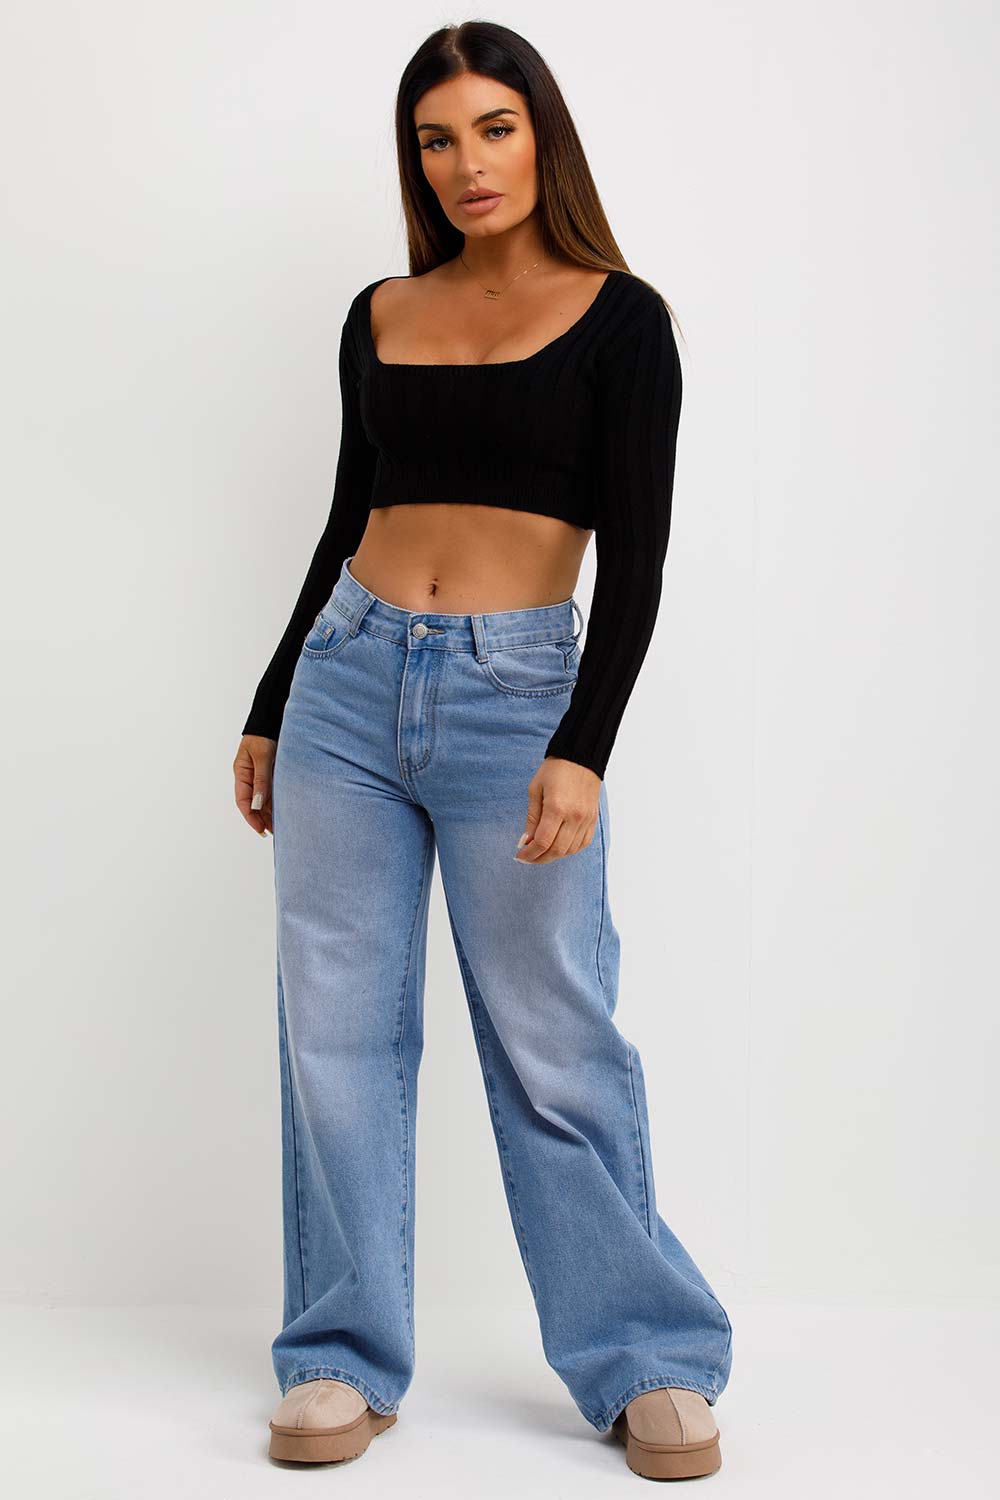 womens crop jumper with long sleeves and square neck